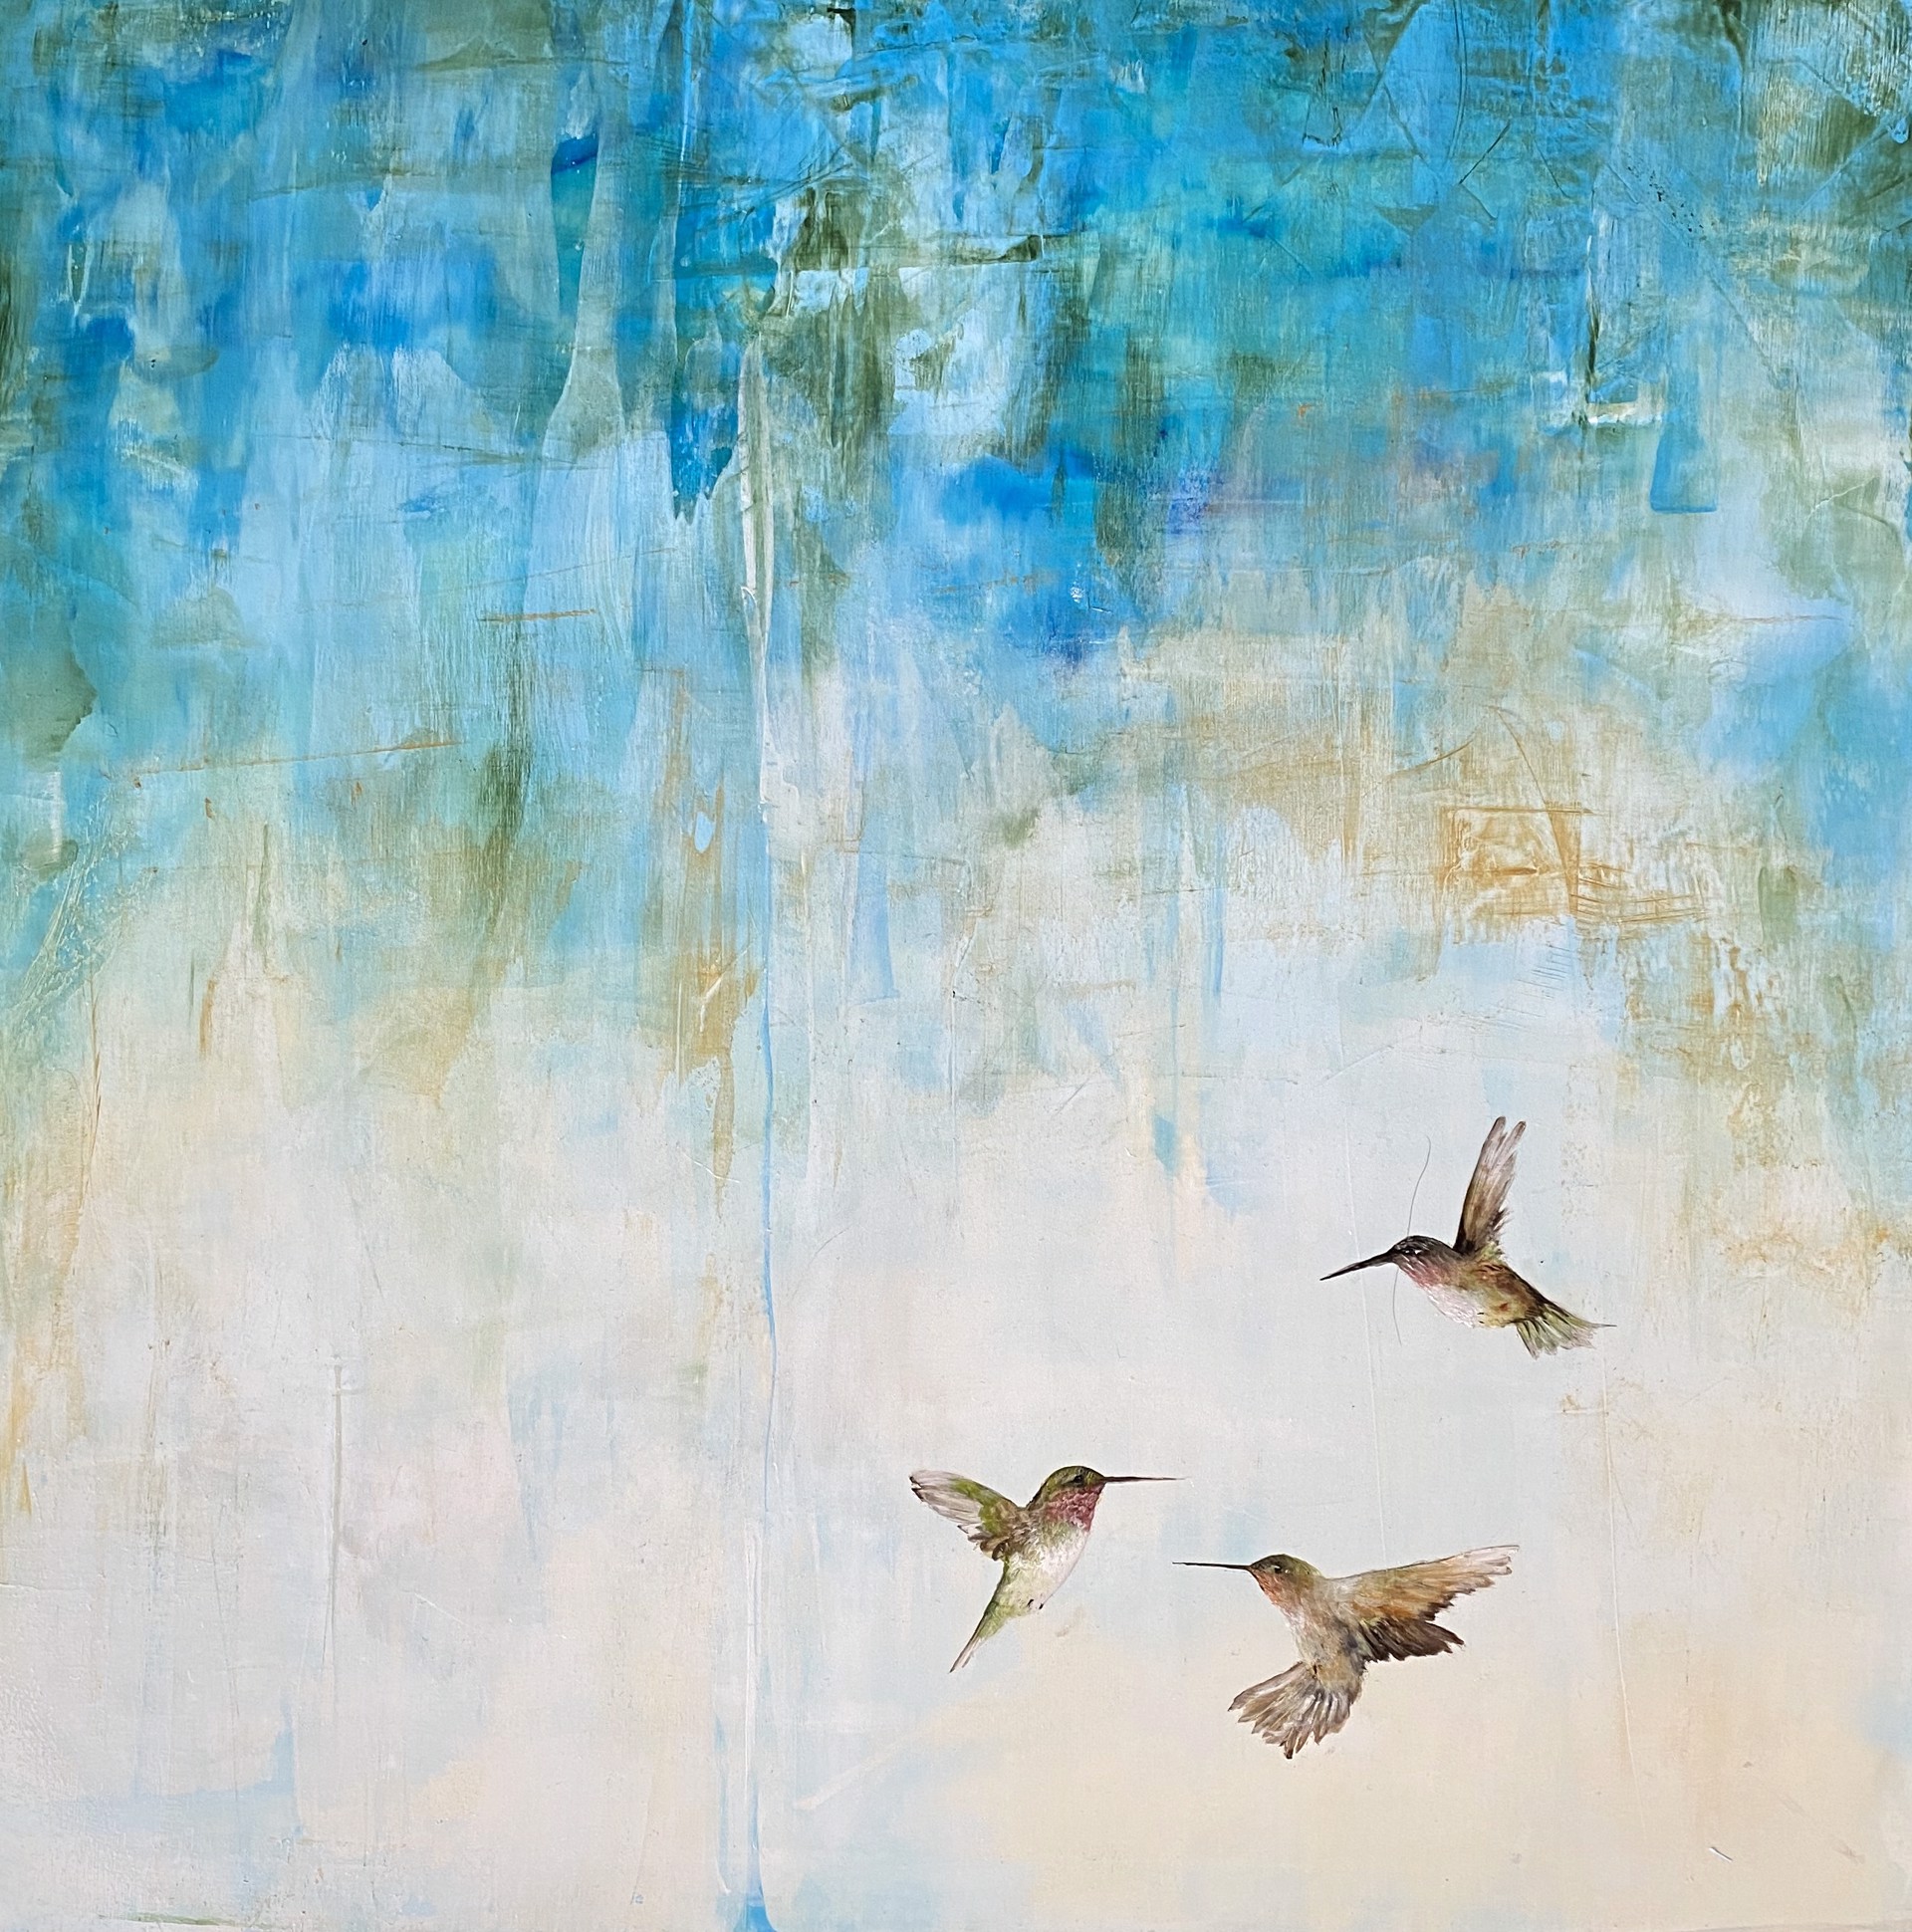 Oil Painting Of Three Humming Birds In Flight With A Contemporary Background Fading Blue To Cream, By Jenna Von Benedikt